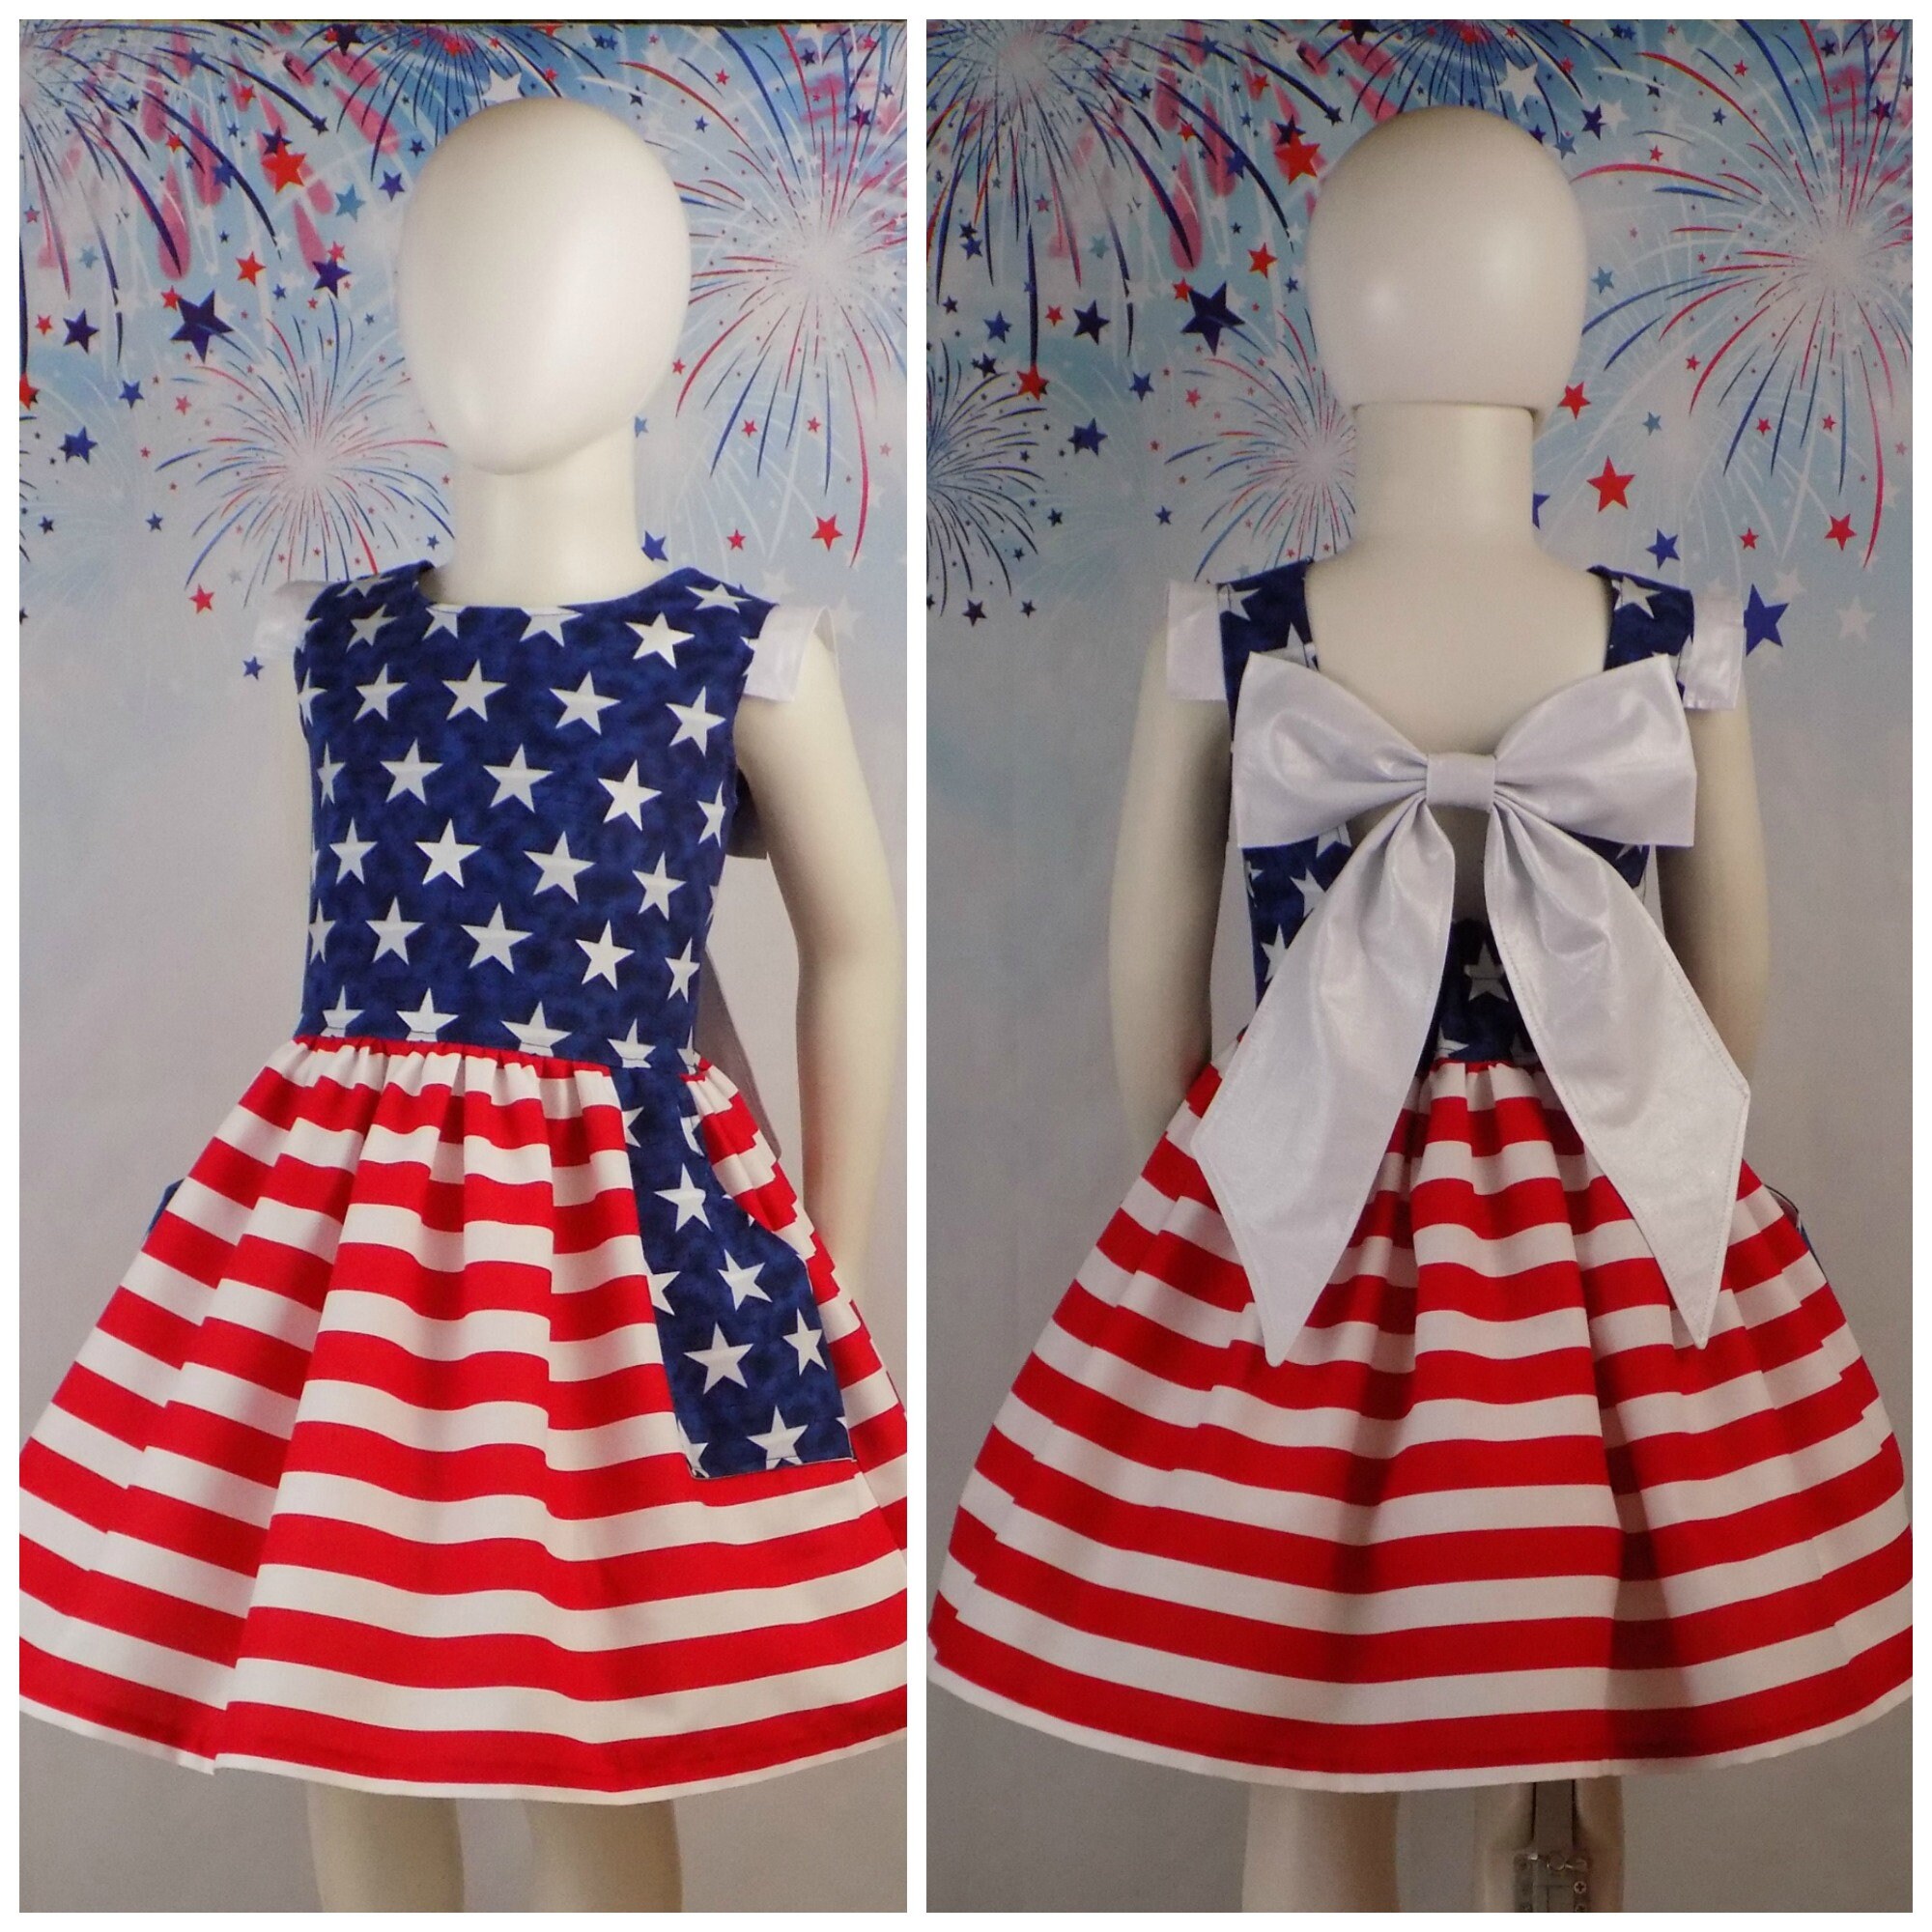 Girls Flag Dress, Blue Star Dress, Patriotic Pageant, Red White Blue Dress,  4th of July, Stars Stripes, USA, Pageant, Casual, Wear, OOC, RWB 